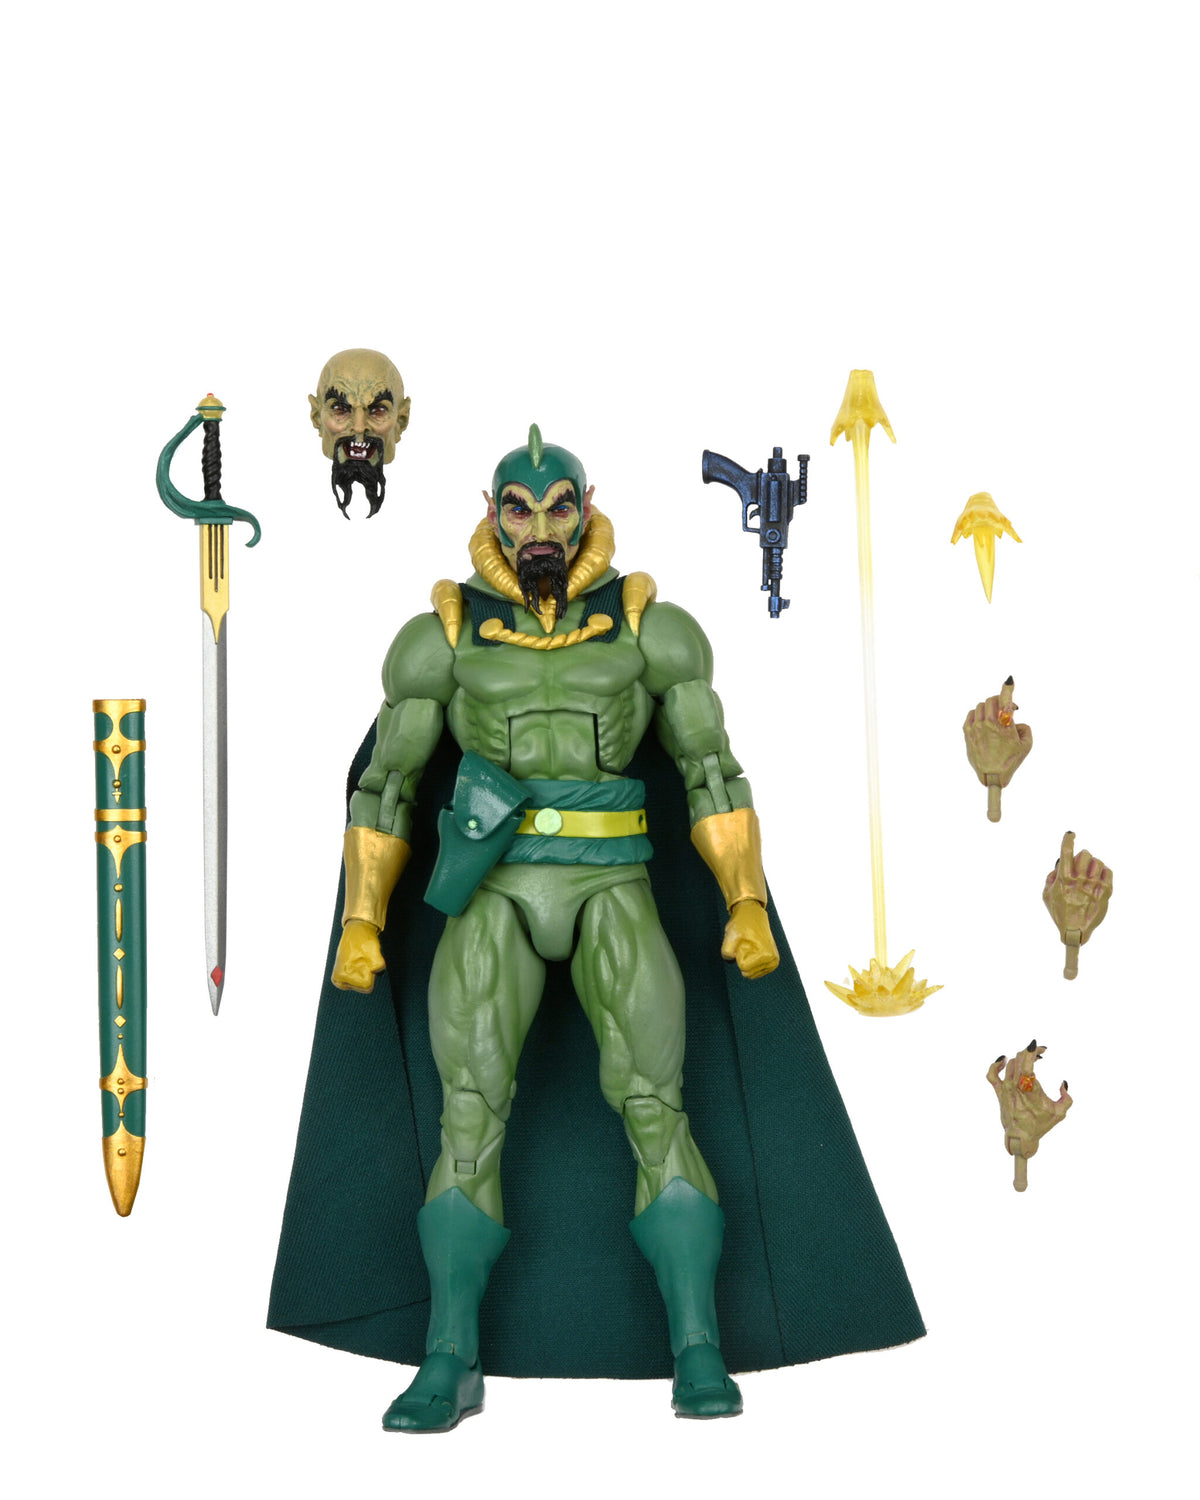 NECA - King Features The Original Superheroes - Ming The Merciless 7" Action Figure